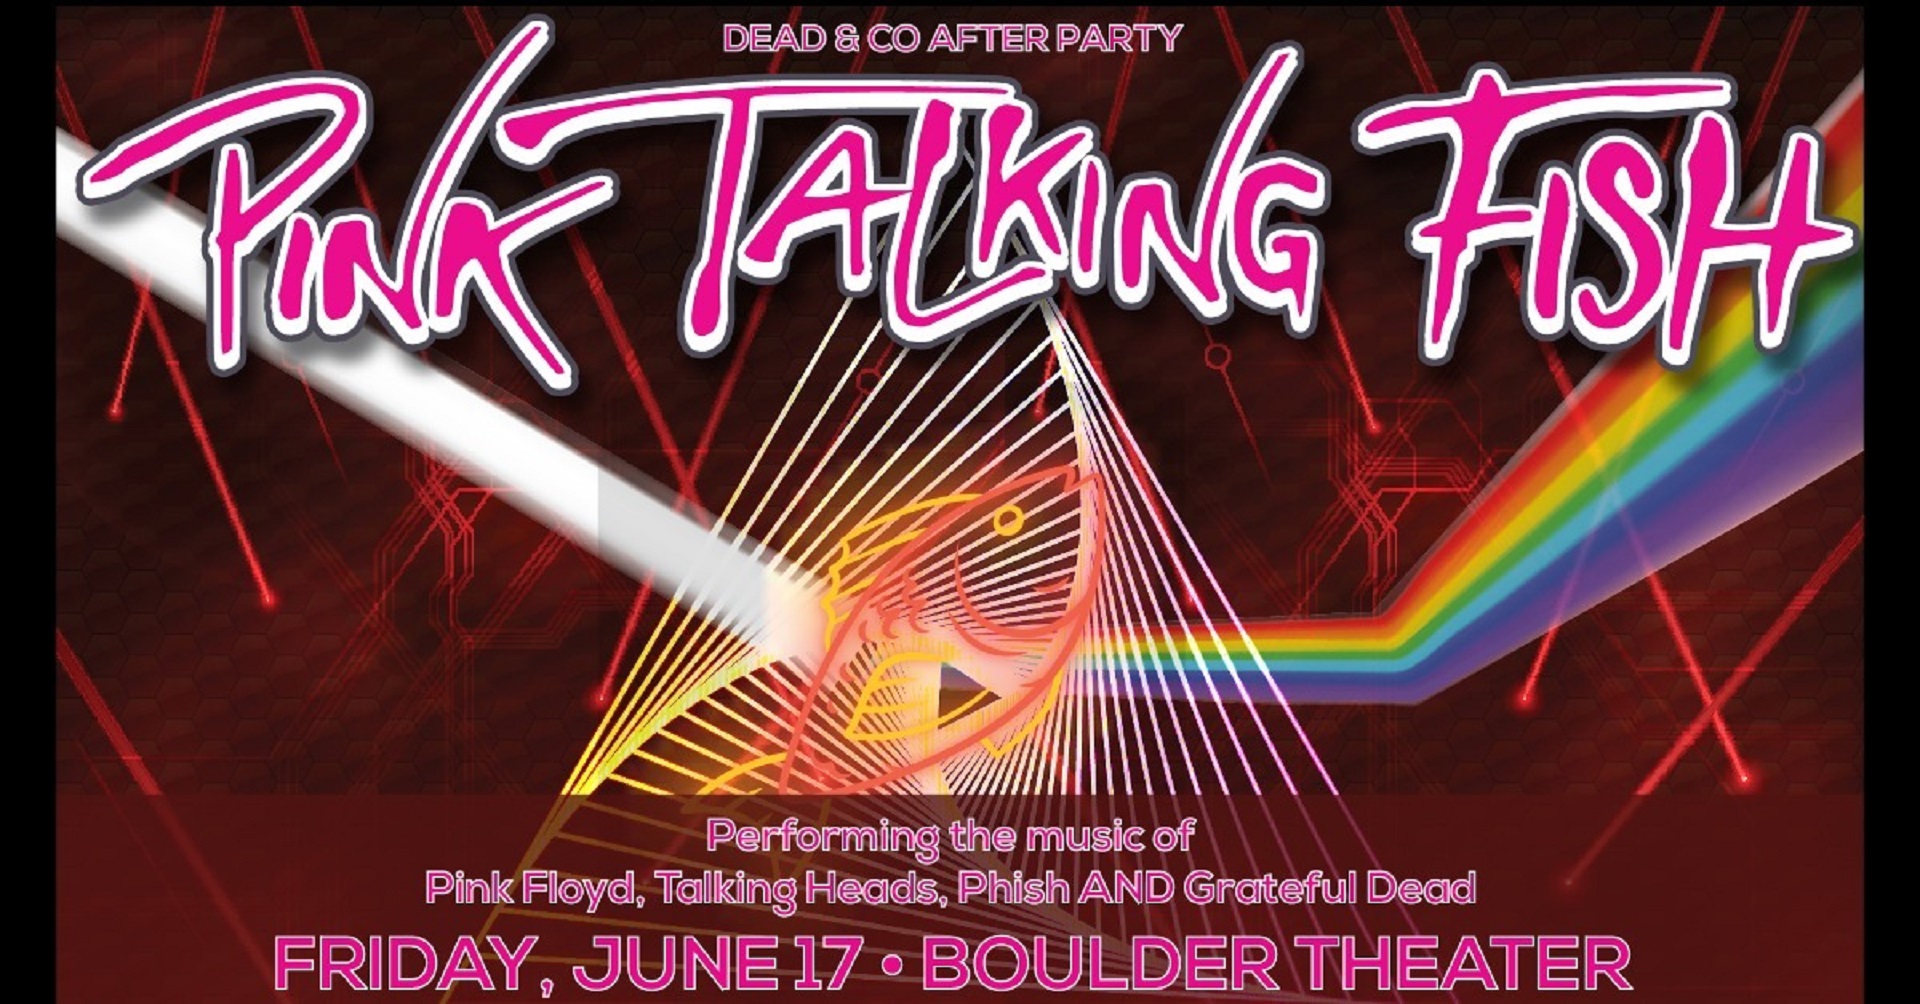 DEAD & CO AFTER PARTY - PINK TALKING FISH ARE DEAD